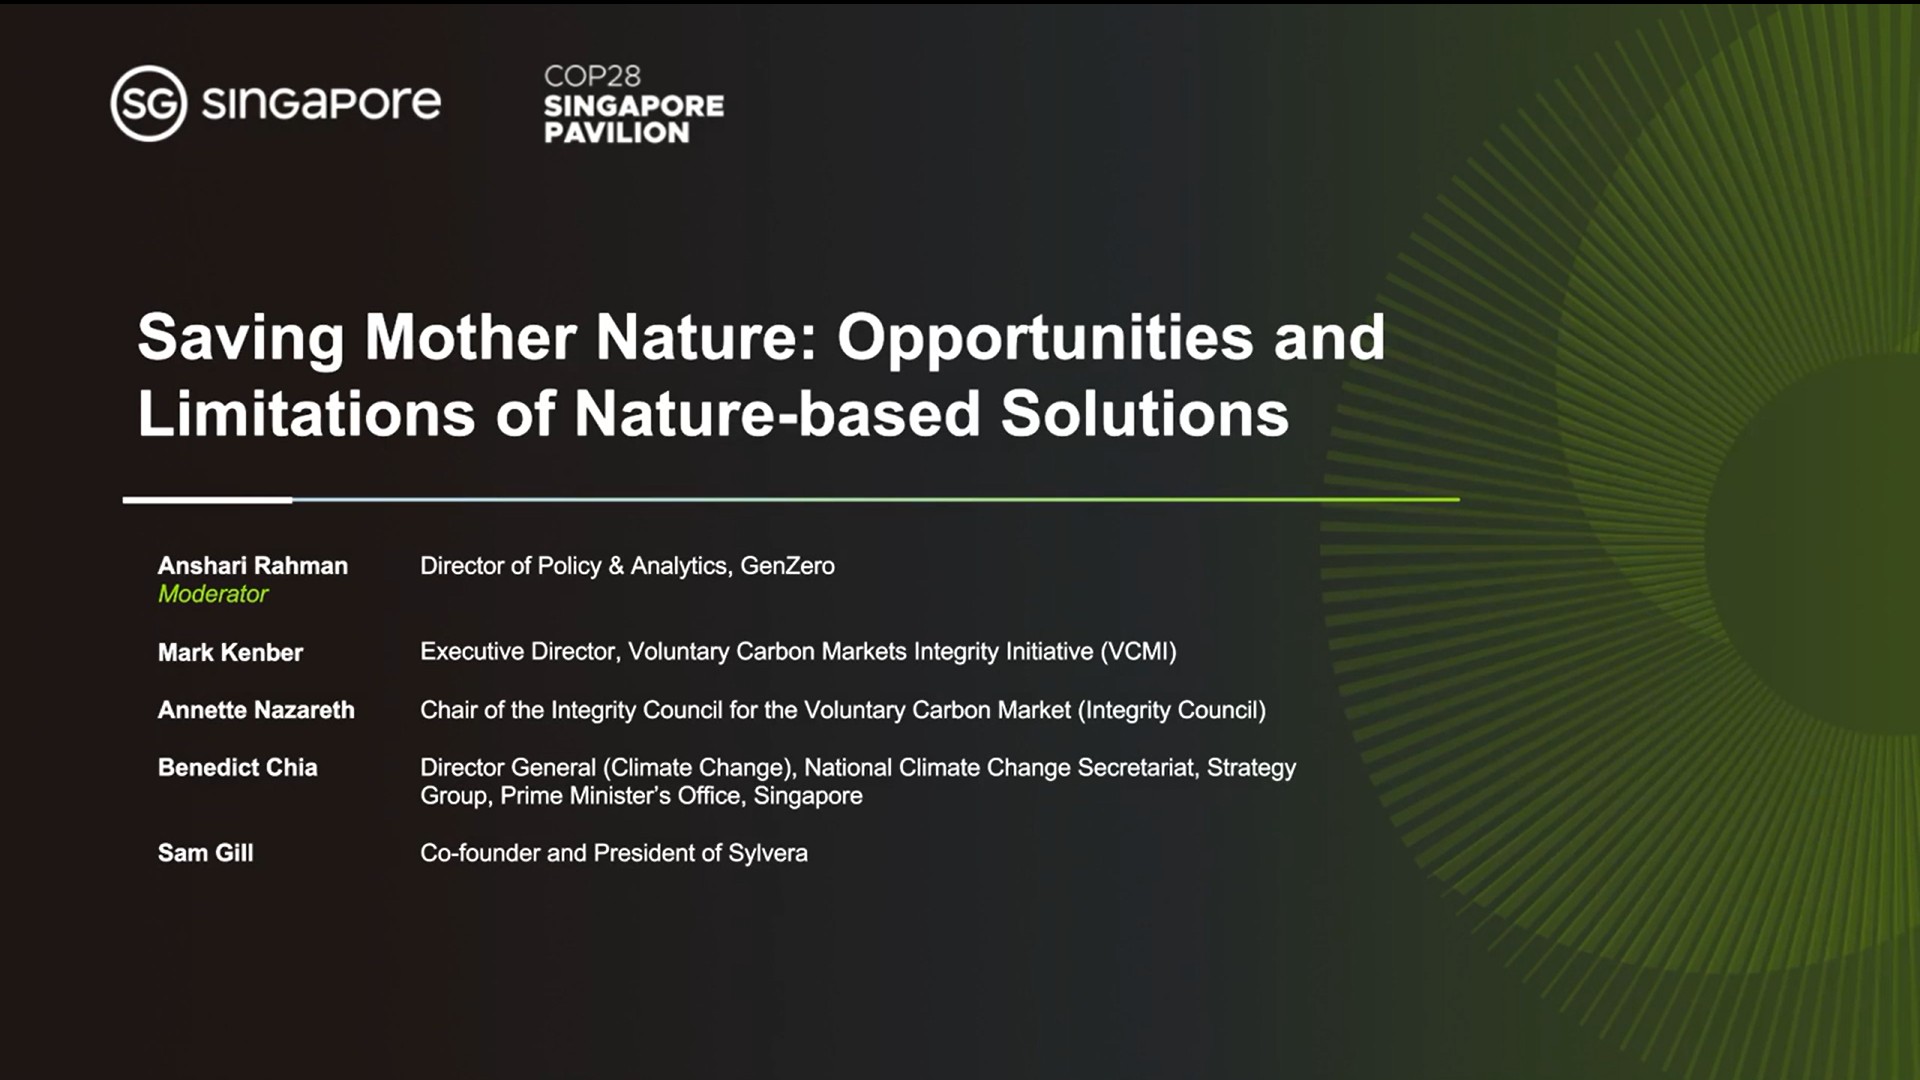 Saving Mother Nature: Opportunities and Limitations of Nature-based Solutions